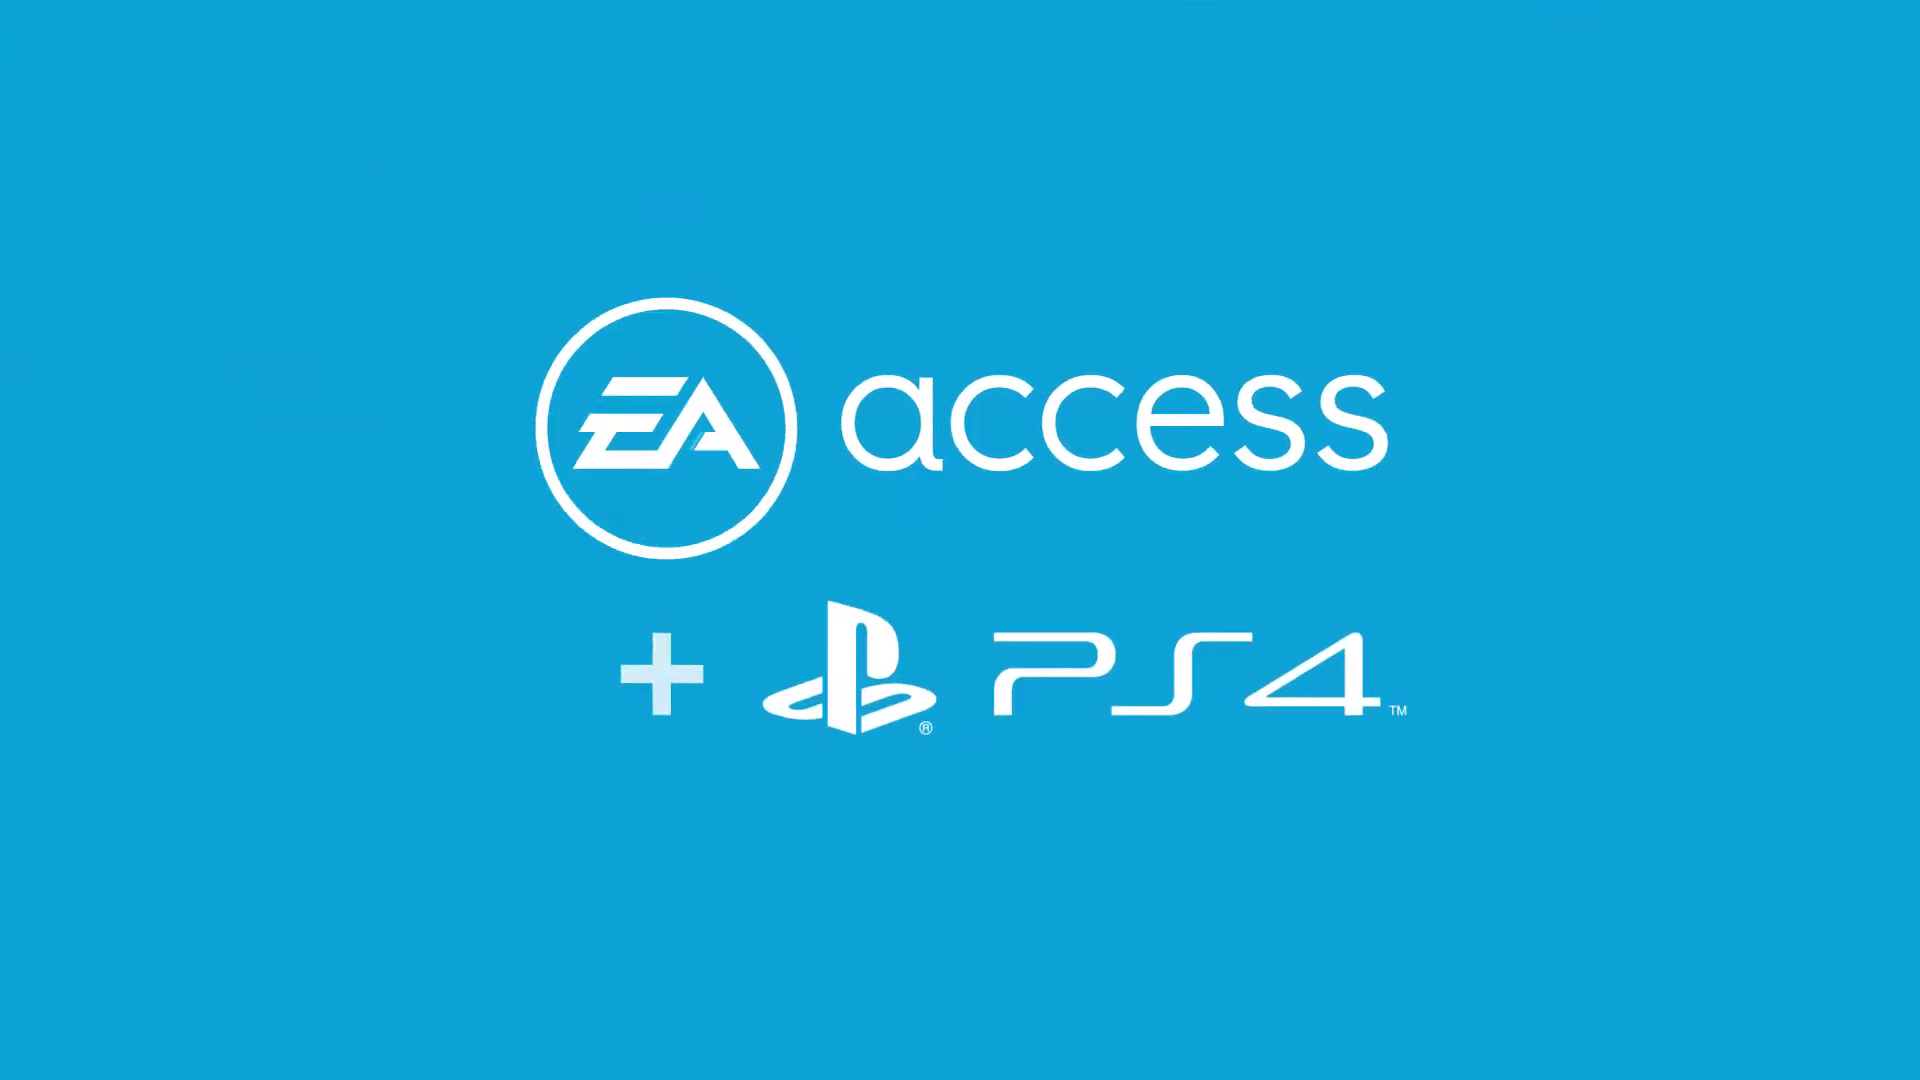 EA Access Is Now Available On PlayStation 4, Here Is What You Get